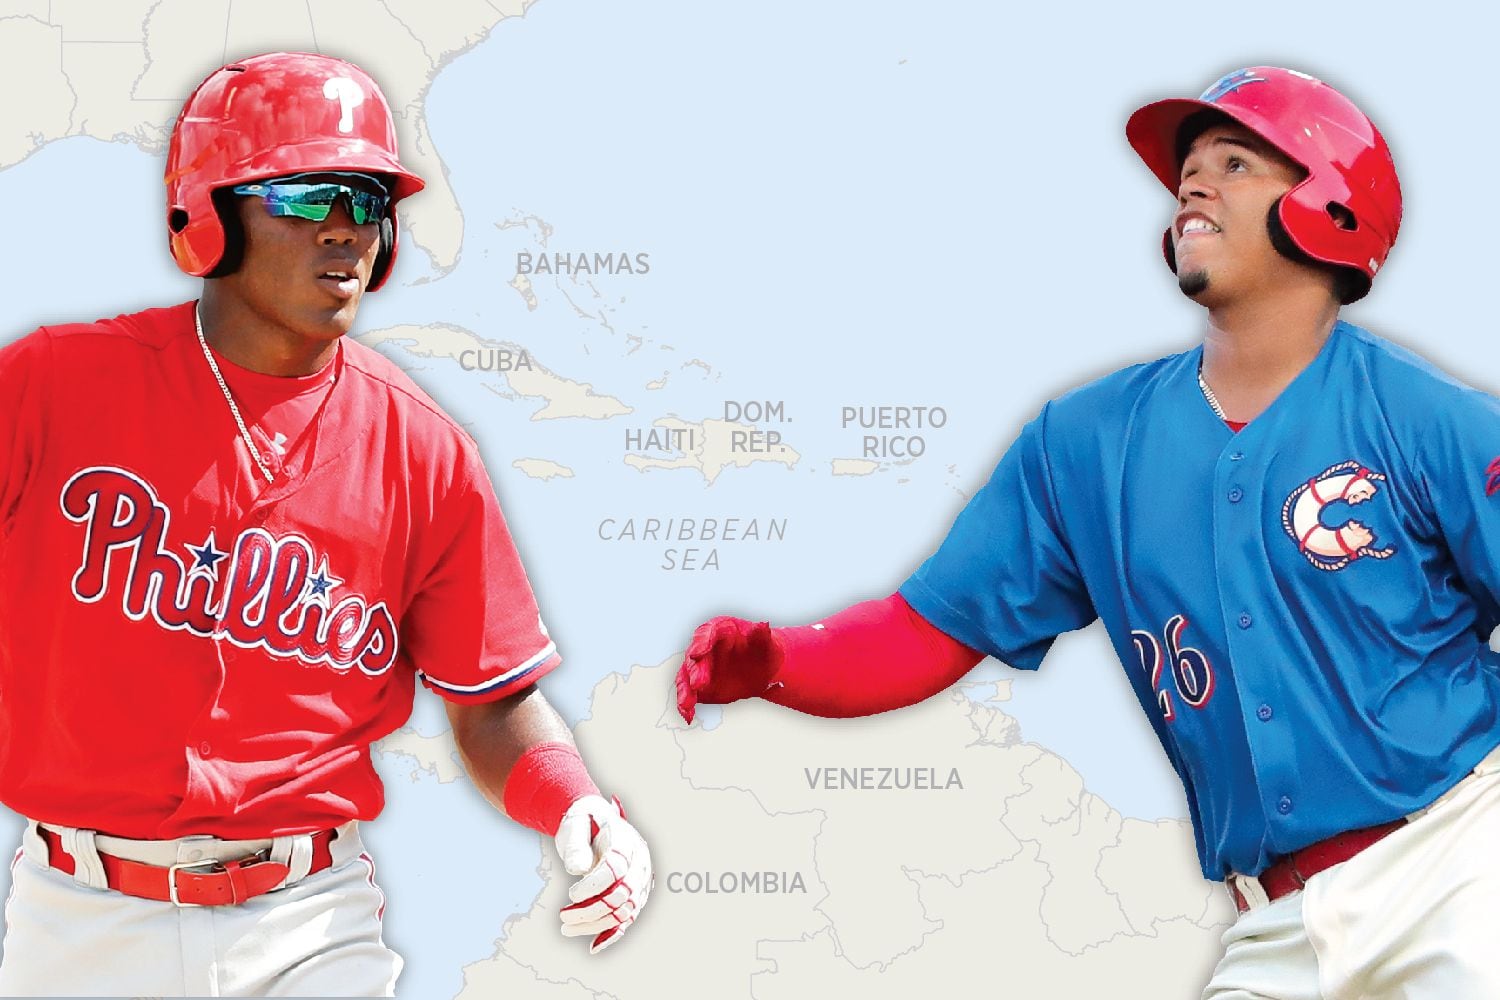 The complicated state of Haitian Dominicans in MLB